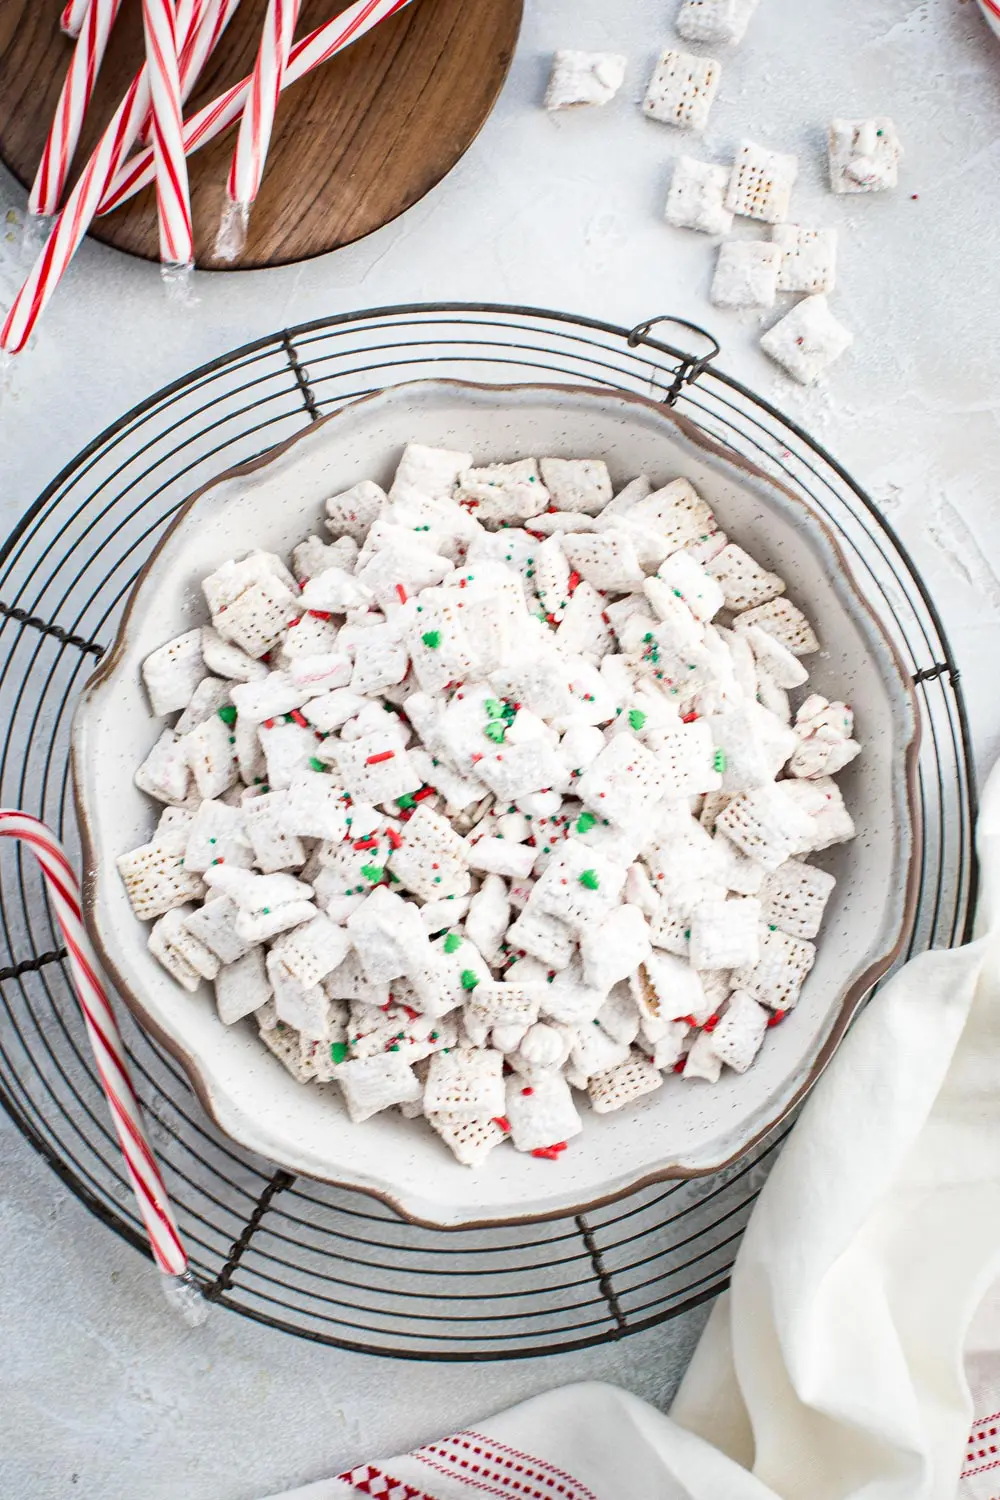 Large bowl of Christmas puppy chow with white chocolate and sprinkles mixed in.